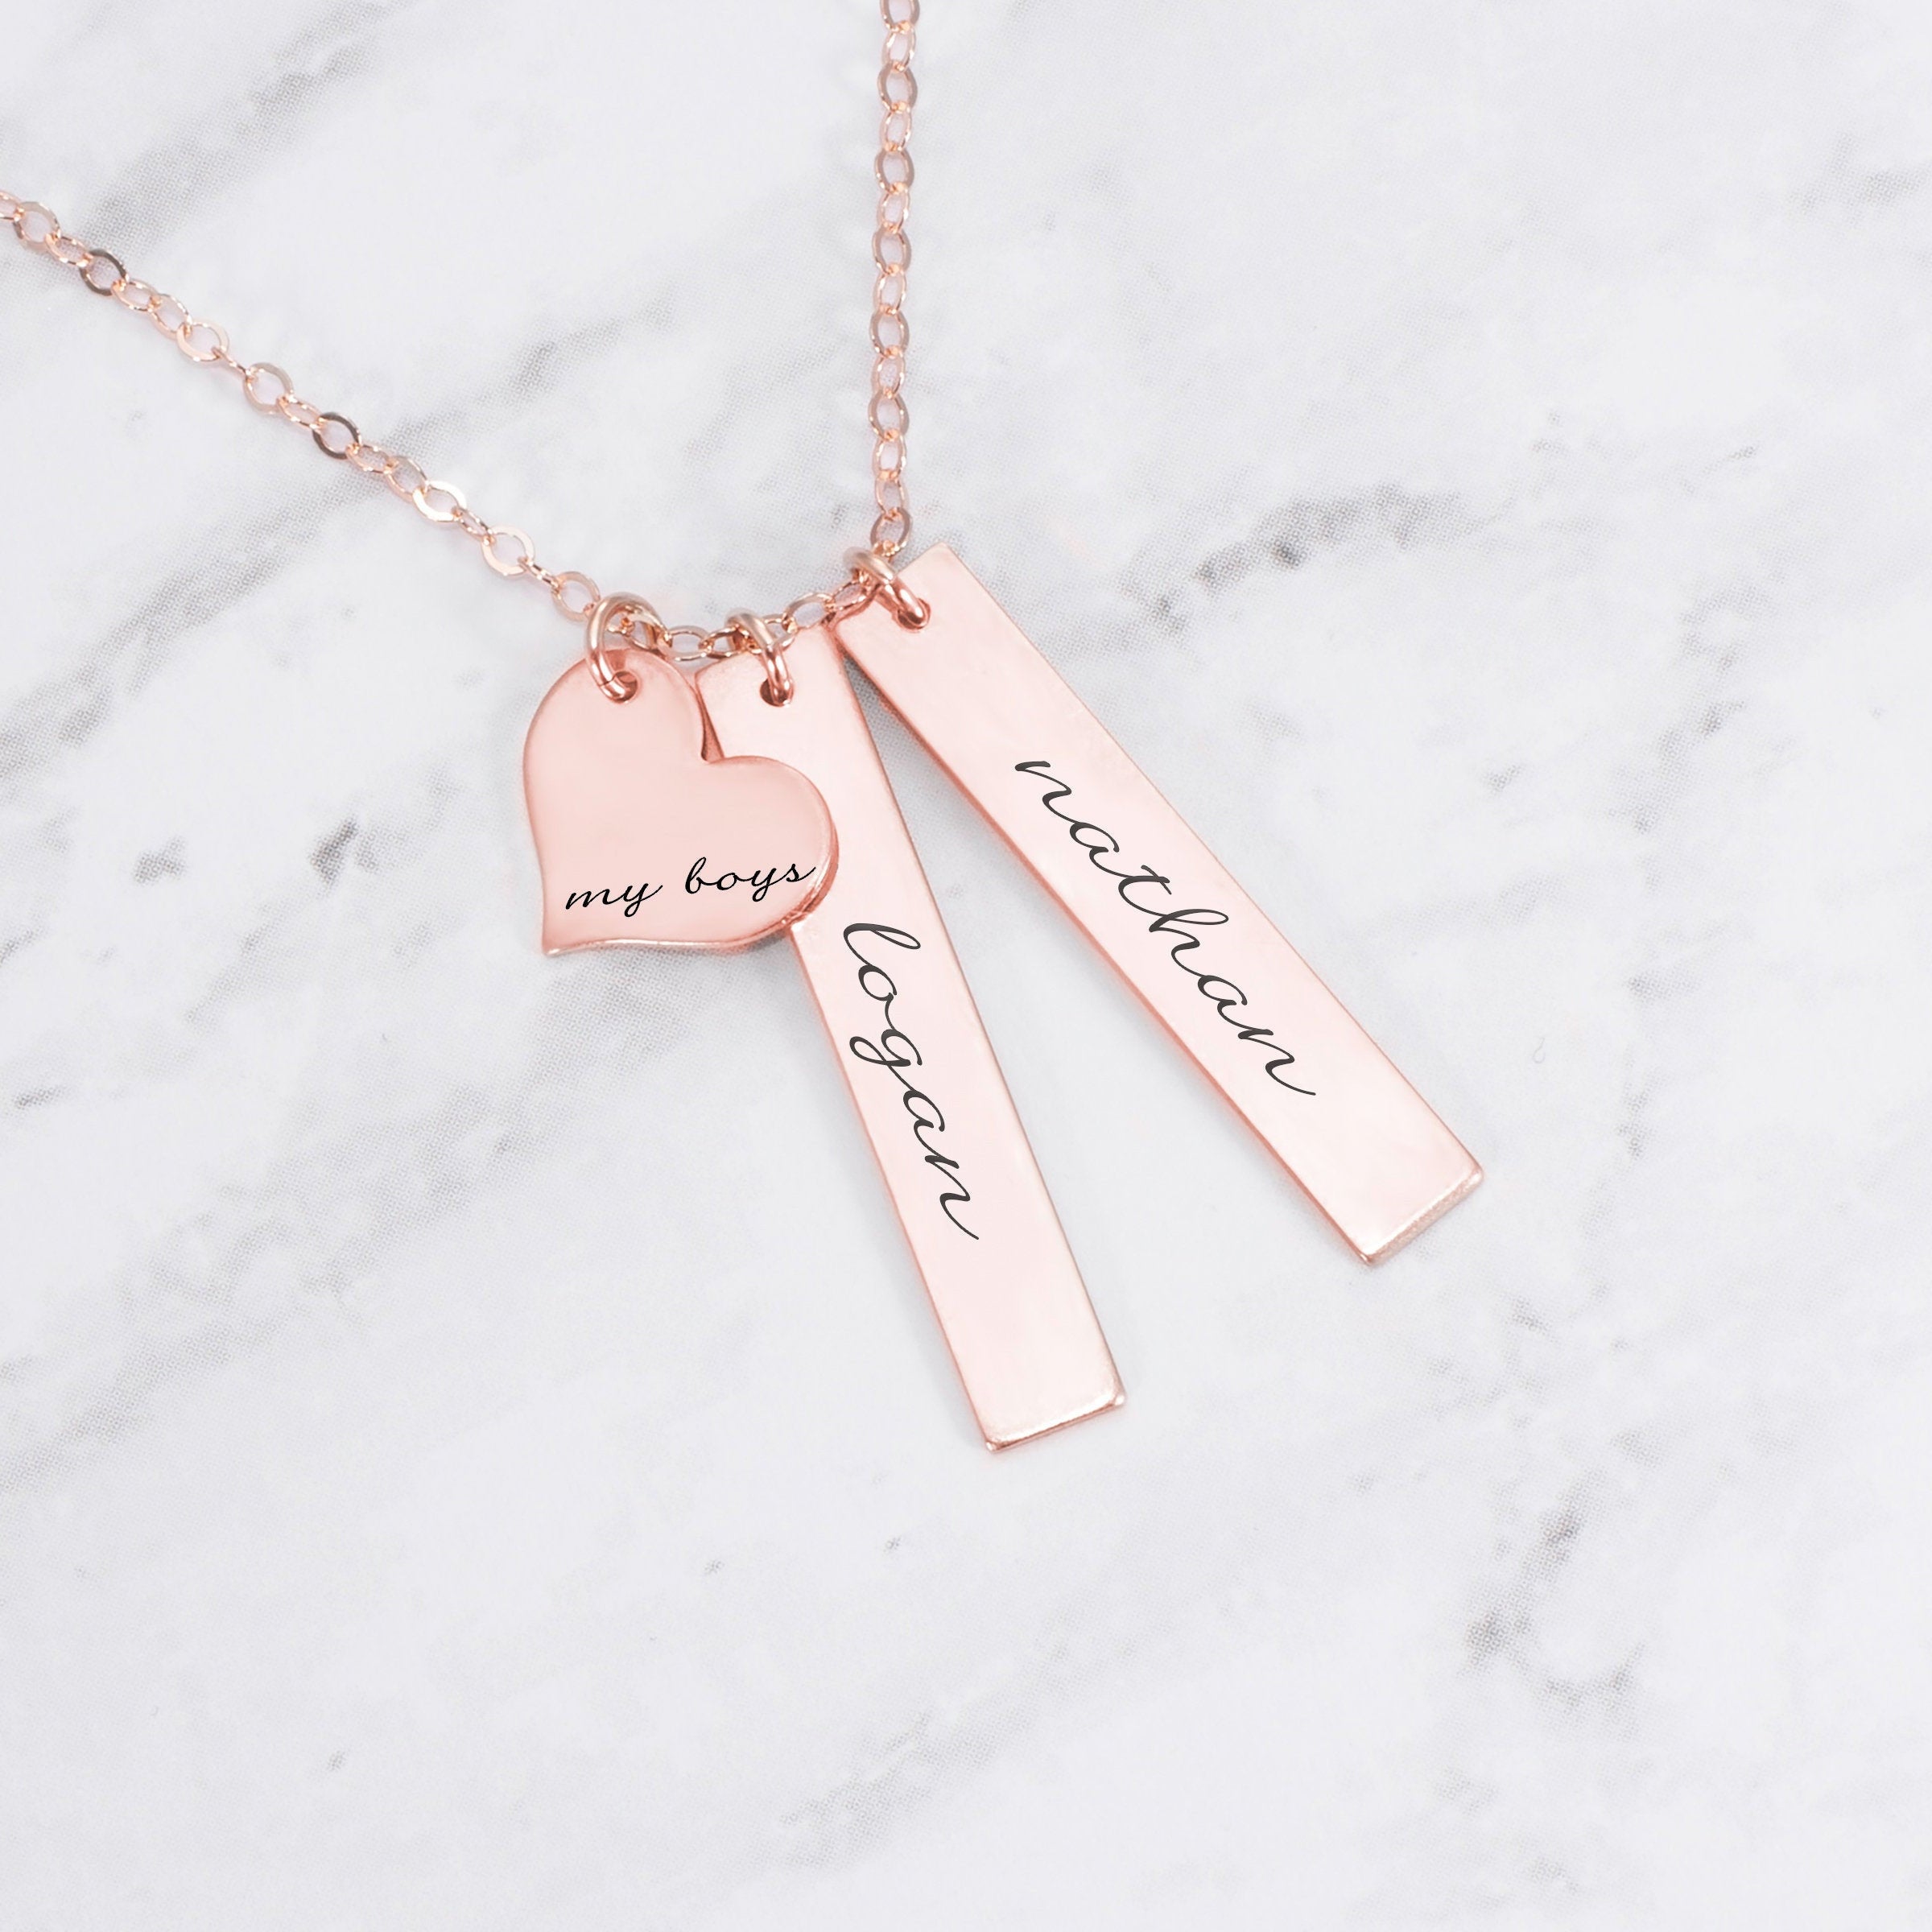 PROUD MOM Necklace | Necklace with engraving | MAMALOVES